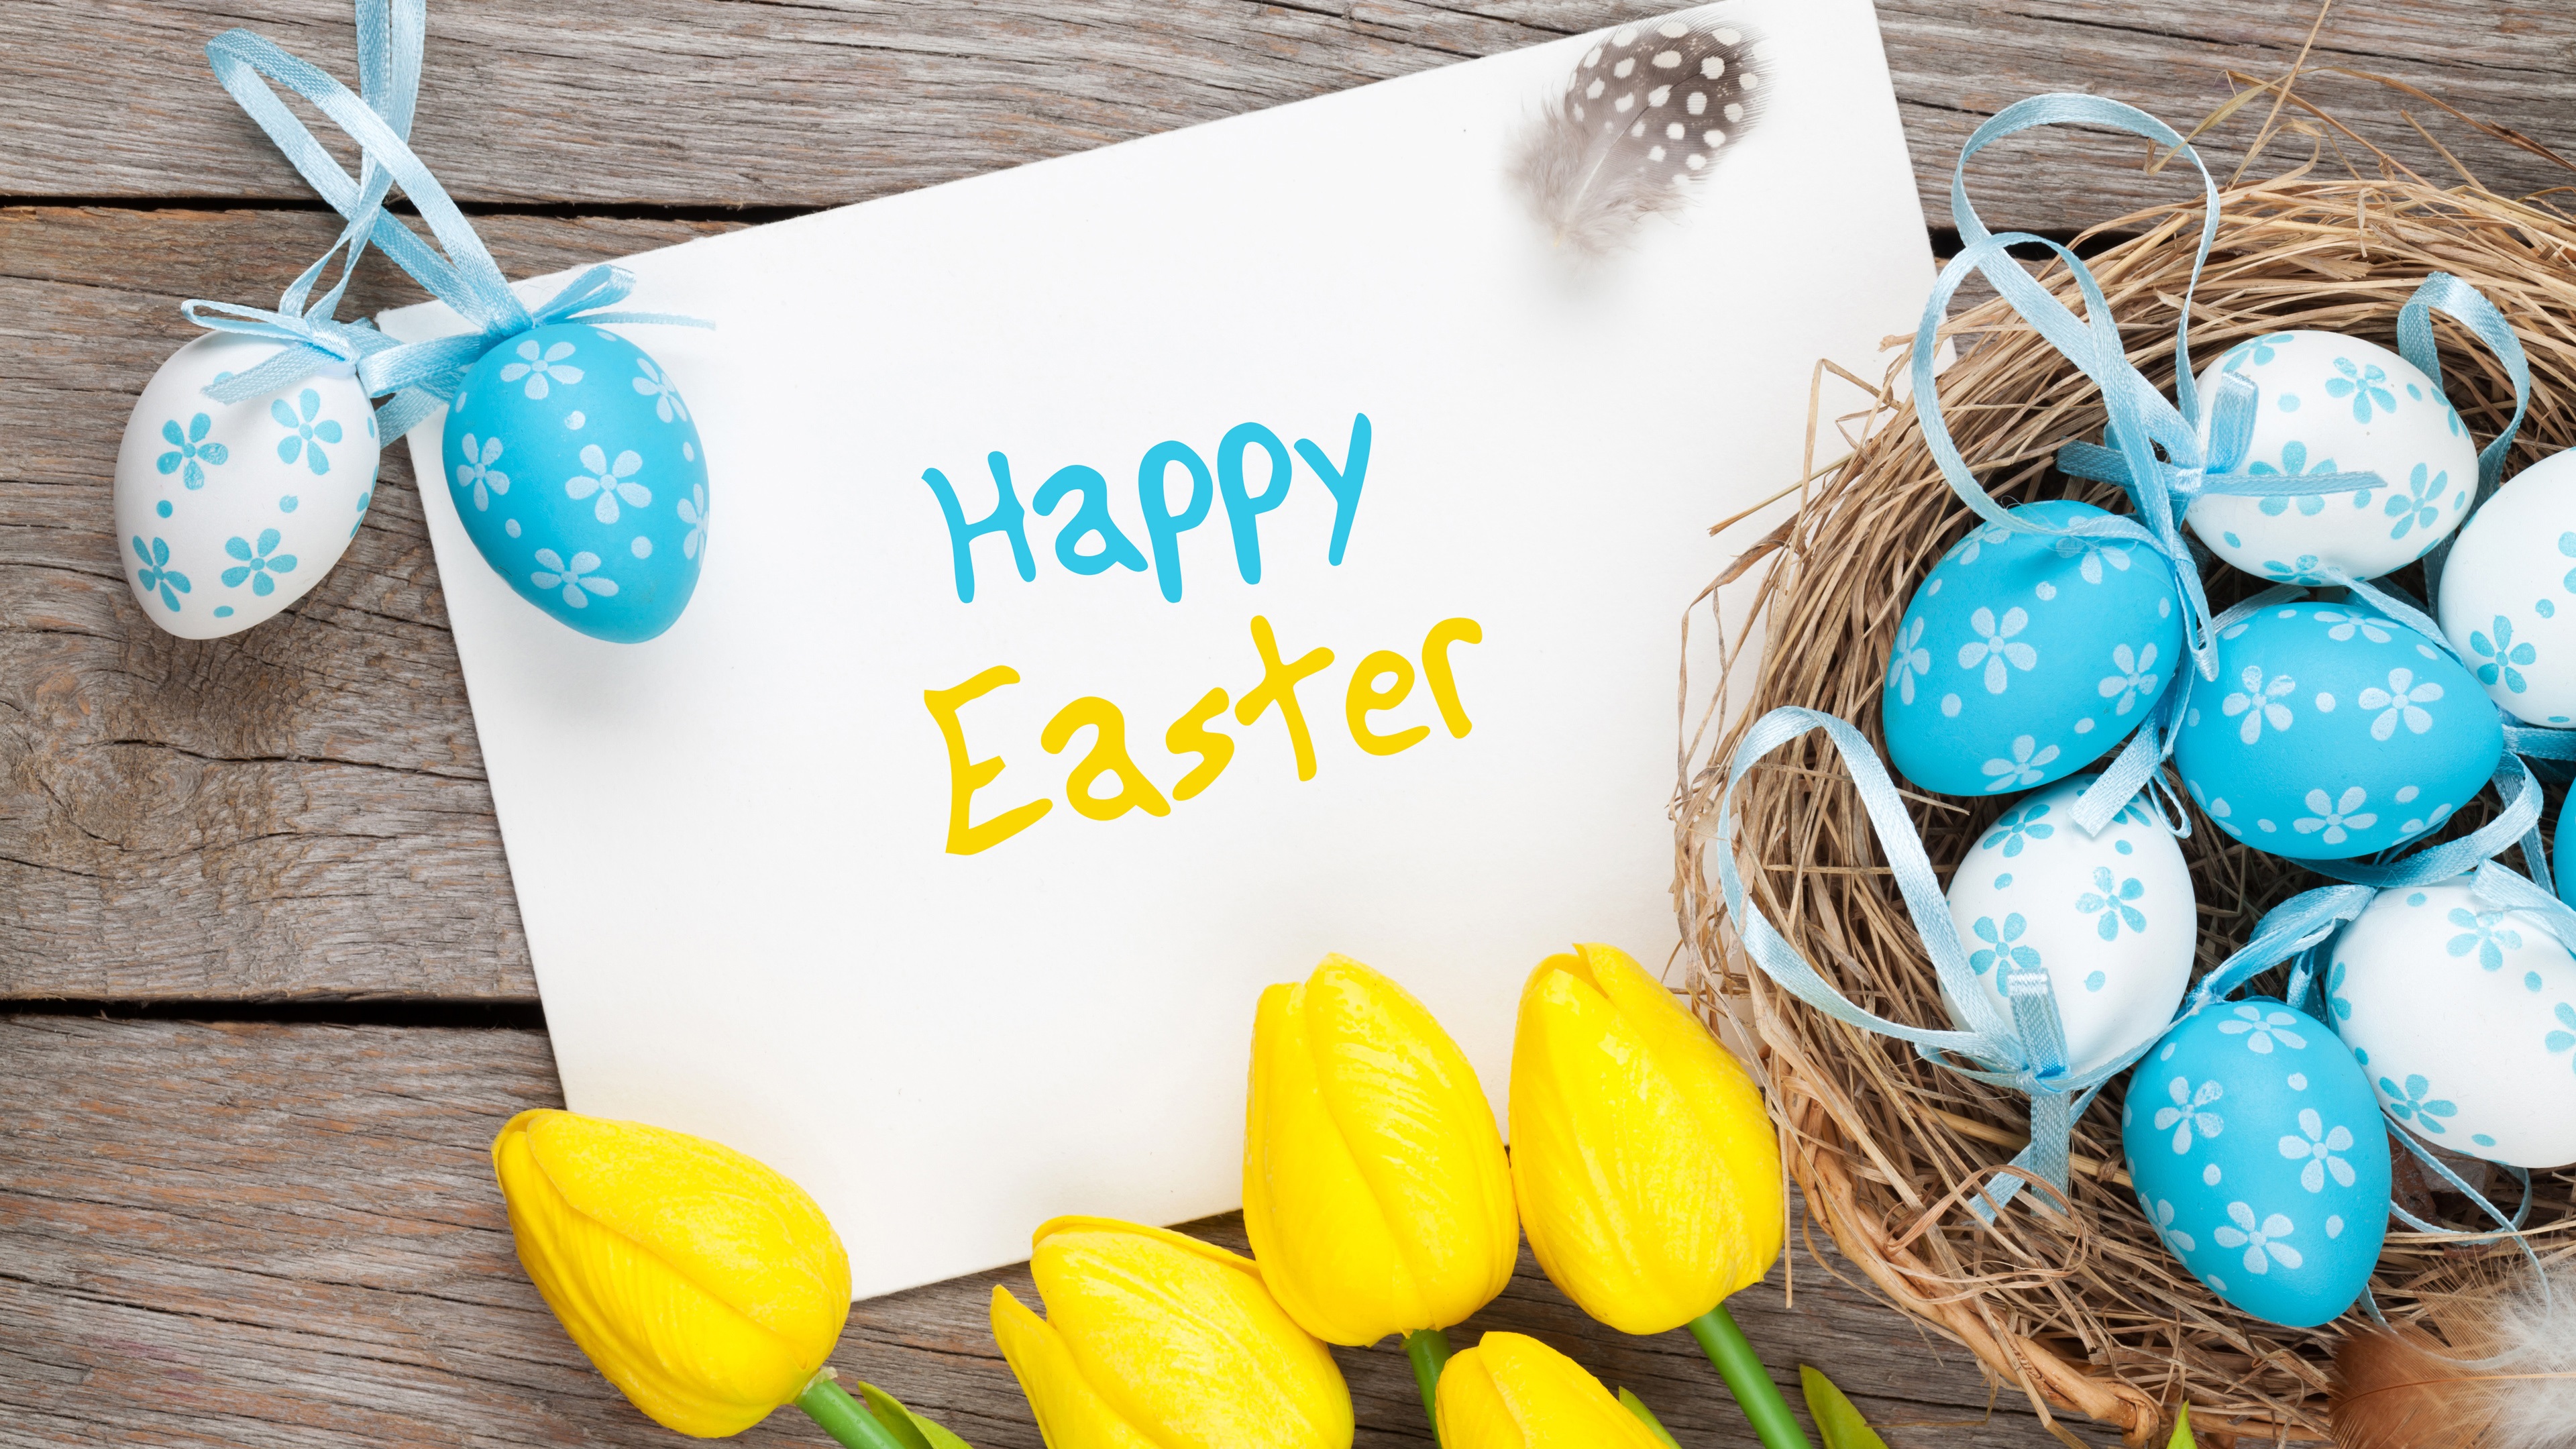 Wallpaper Happy Easter, eggs, yellow tulips 3840x2160 UHD 4K Picture, Image